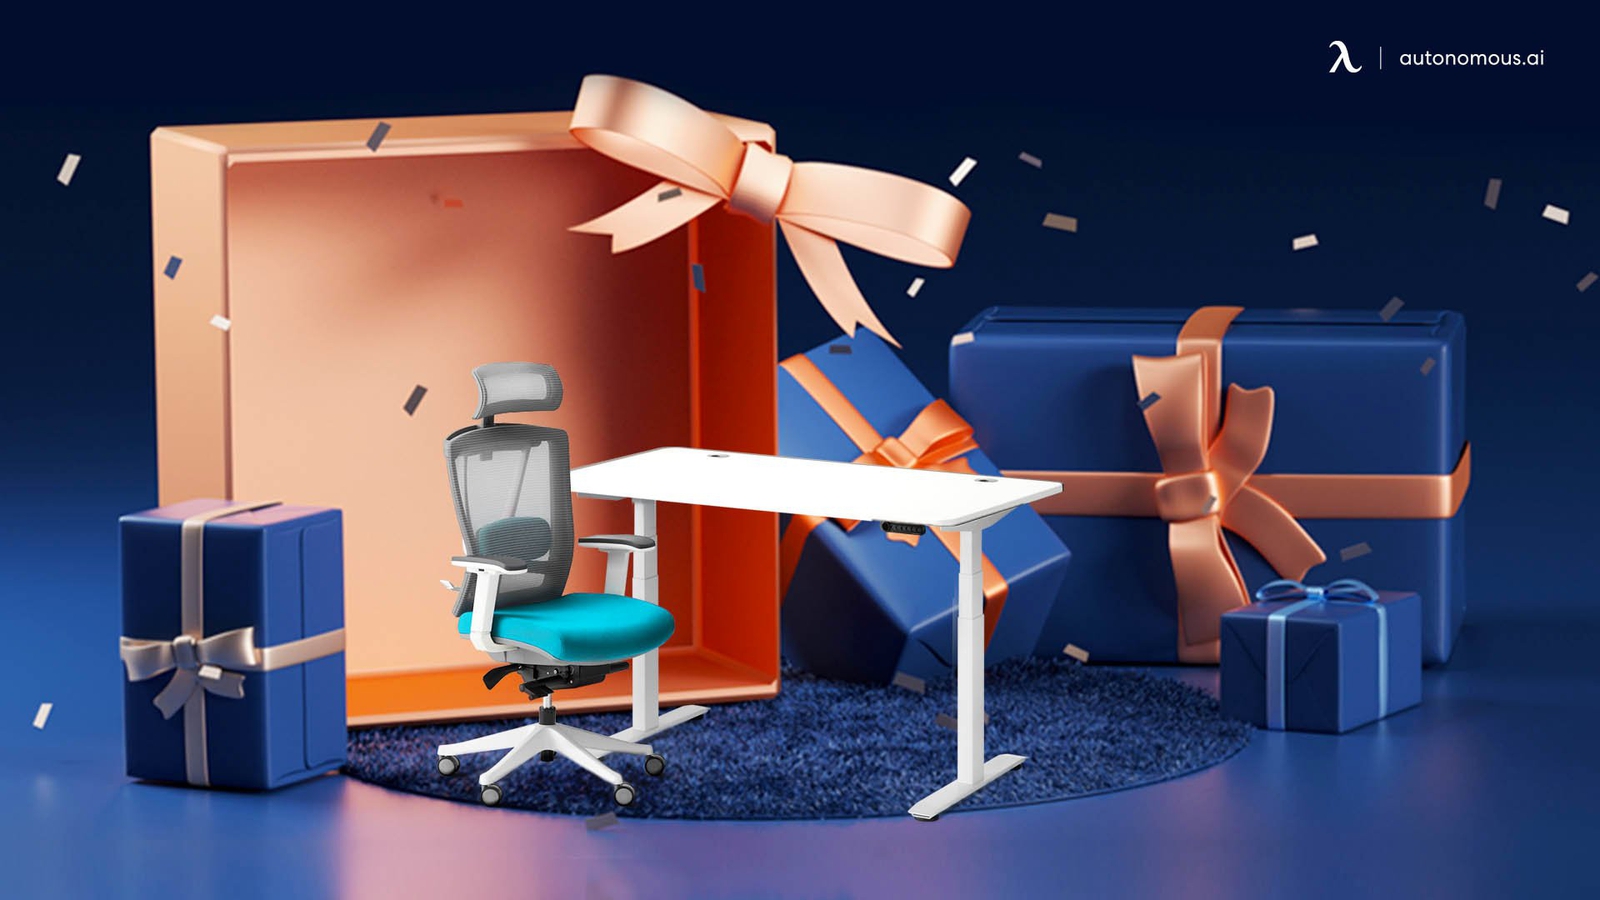 What’s Inside Your BOXING DAY MYSTERY BOX? Unwrap Autonomous gifts!